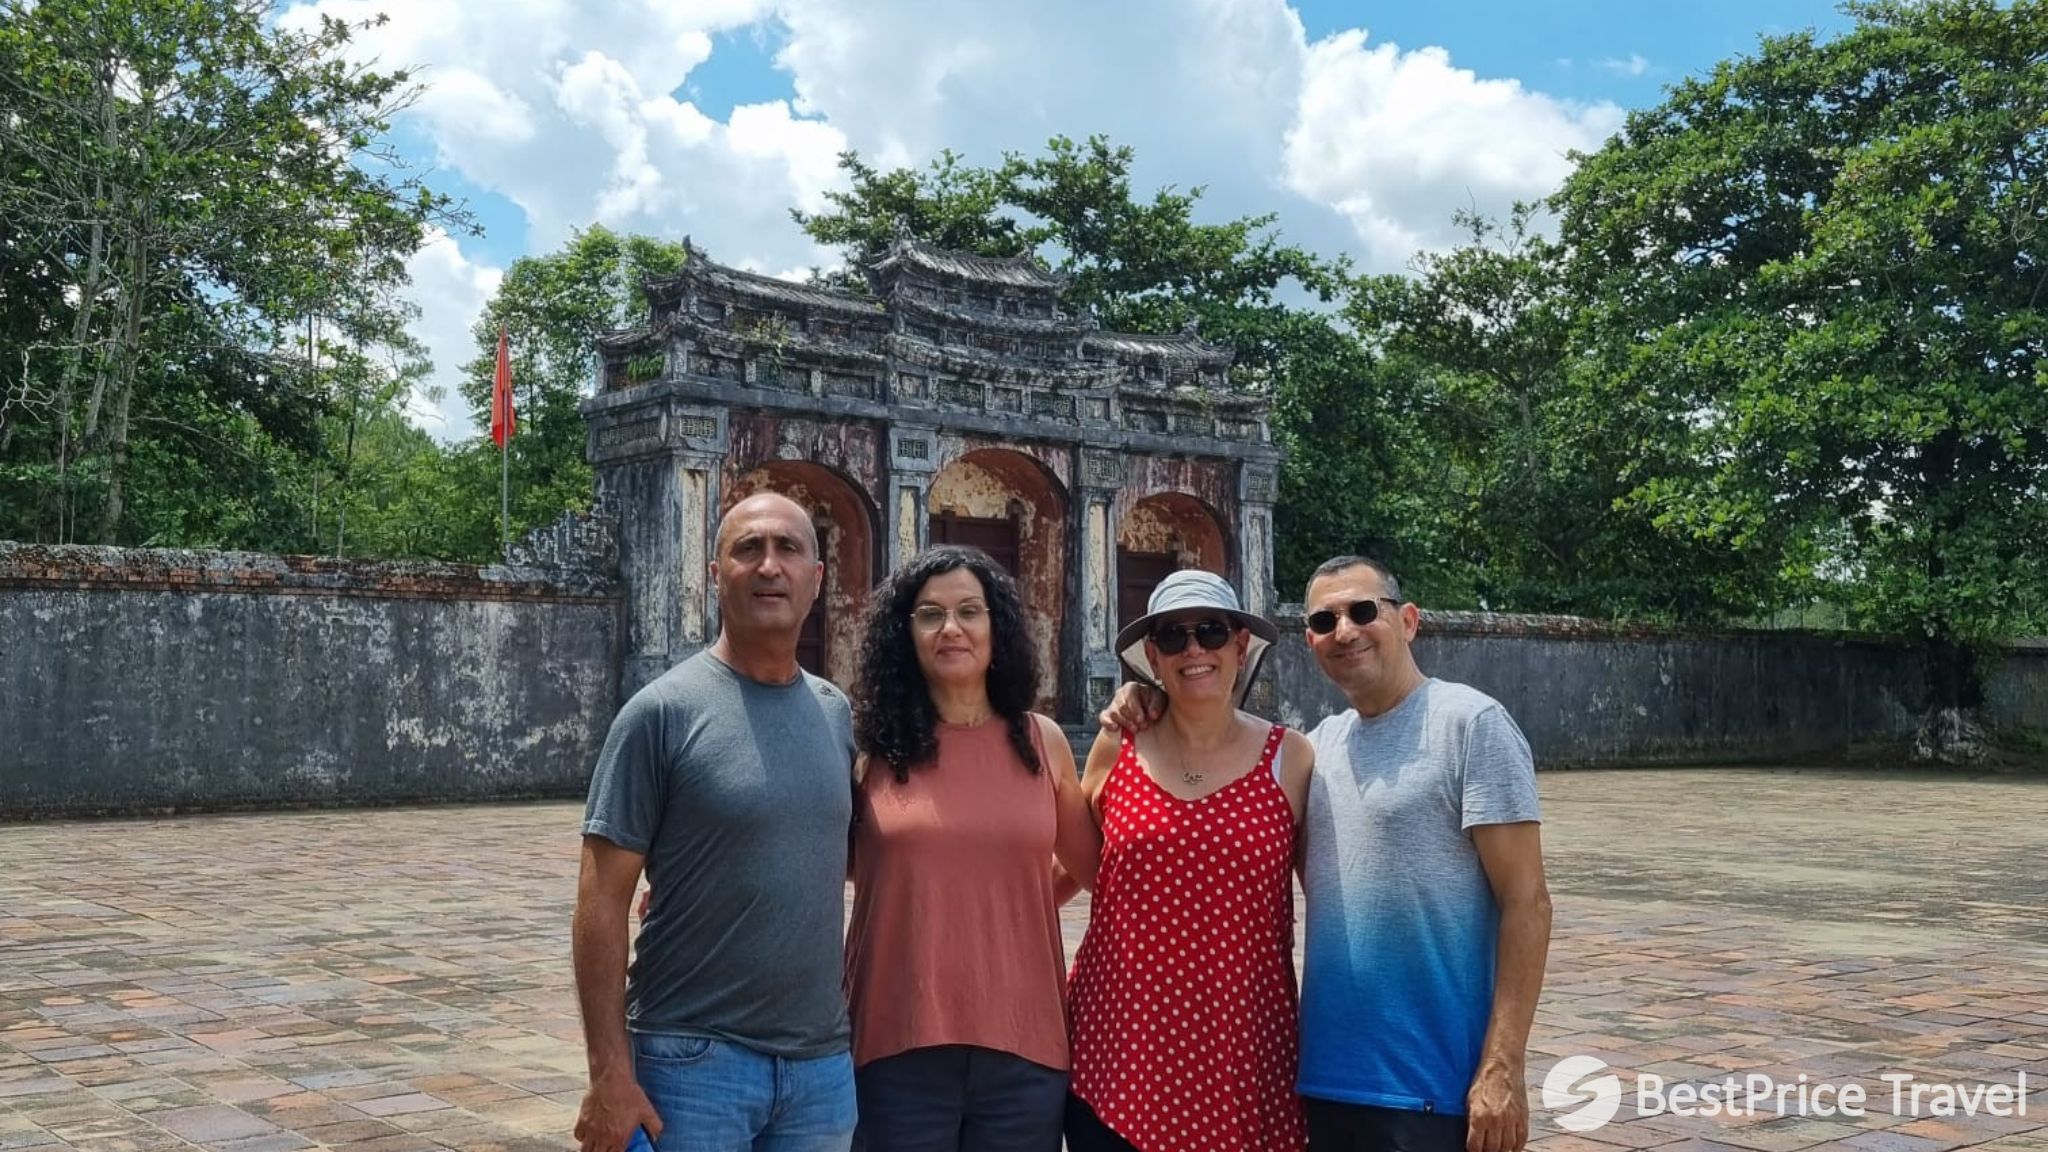 Day 12 Gain Knowlegde About Vietnam History Through A Visit To Imperial Citadel